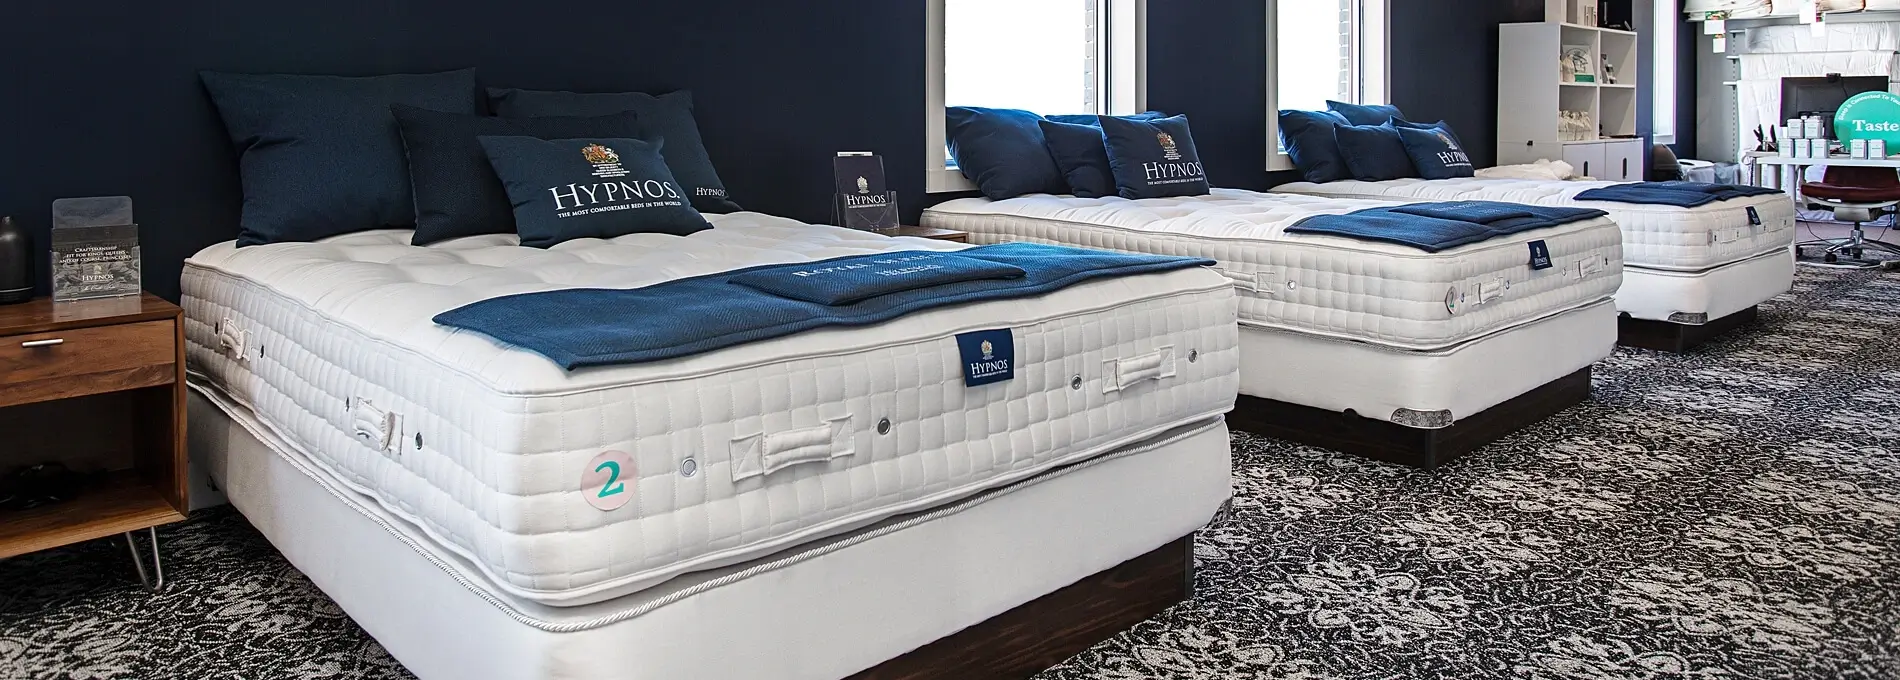 Hastens Luxurious Bedding and Accessories